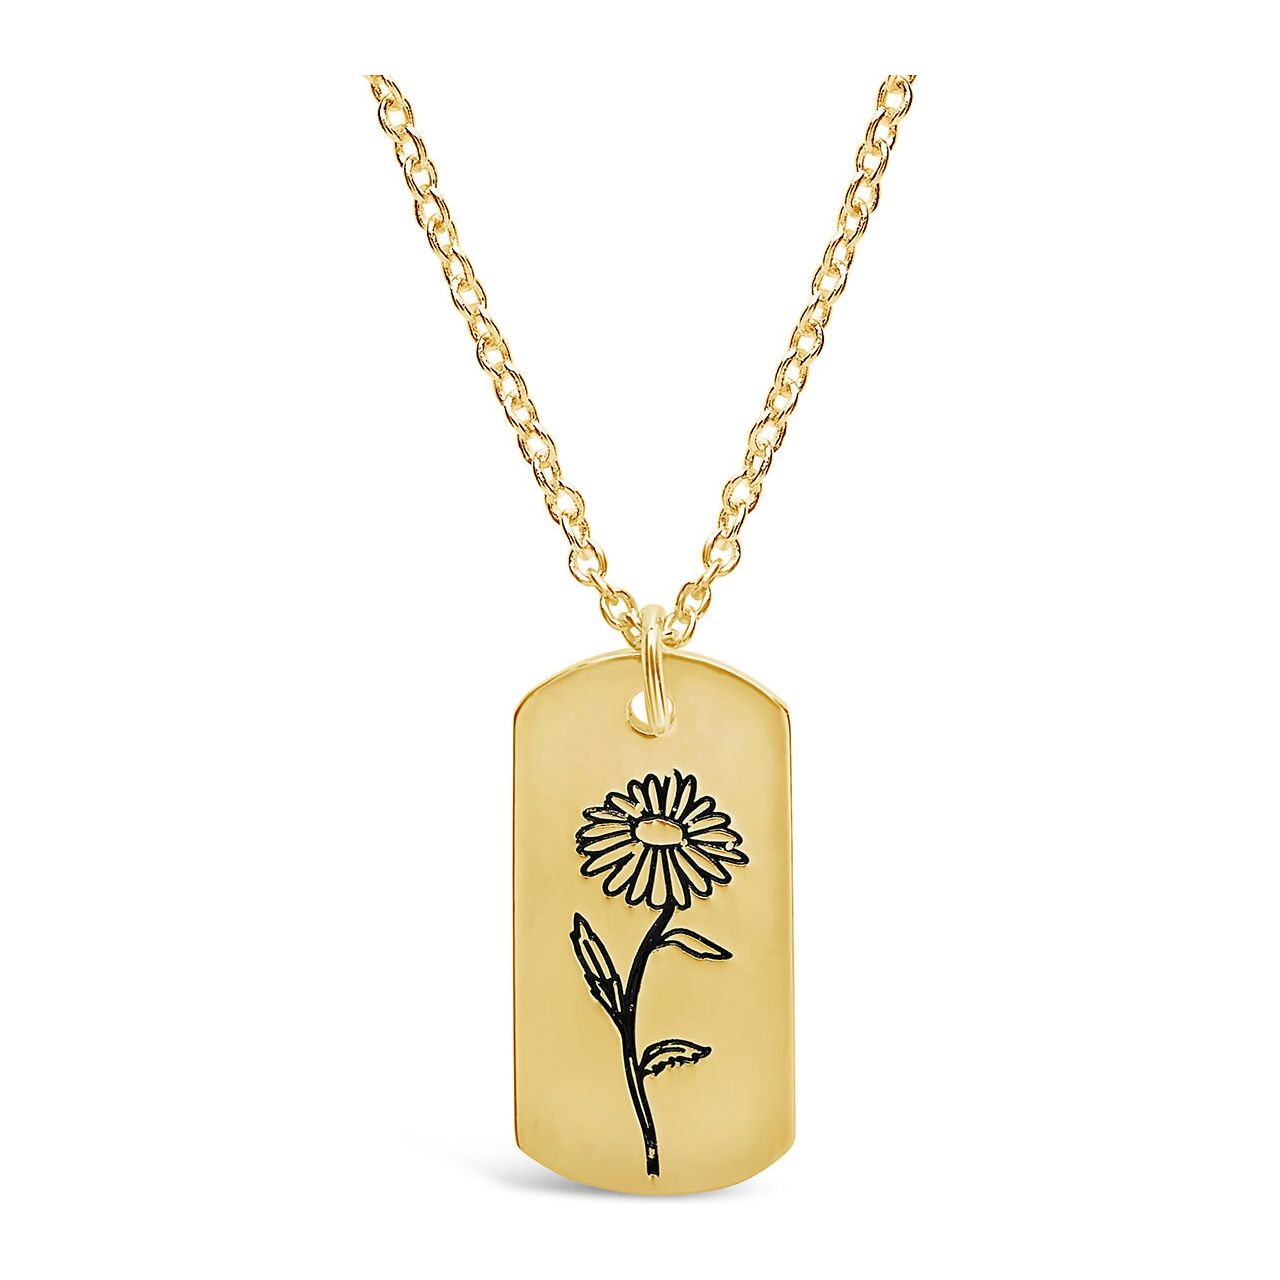 Birth Flower Pendant by Sterling Forever